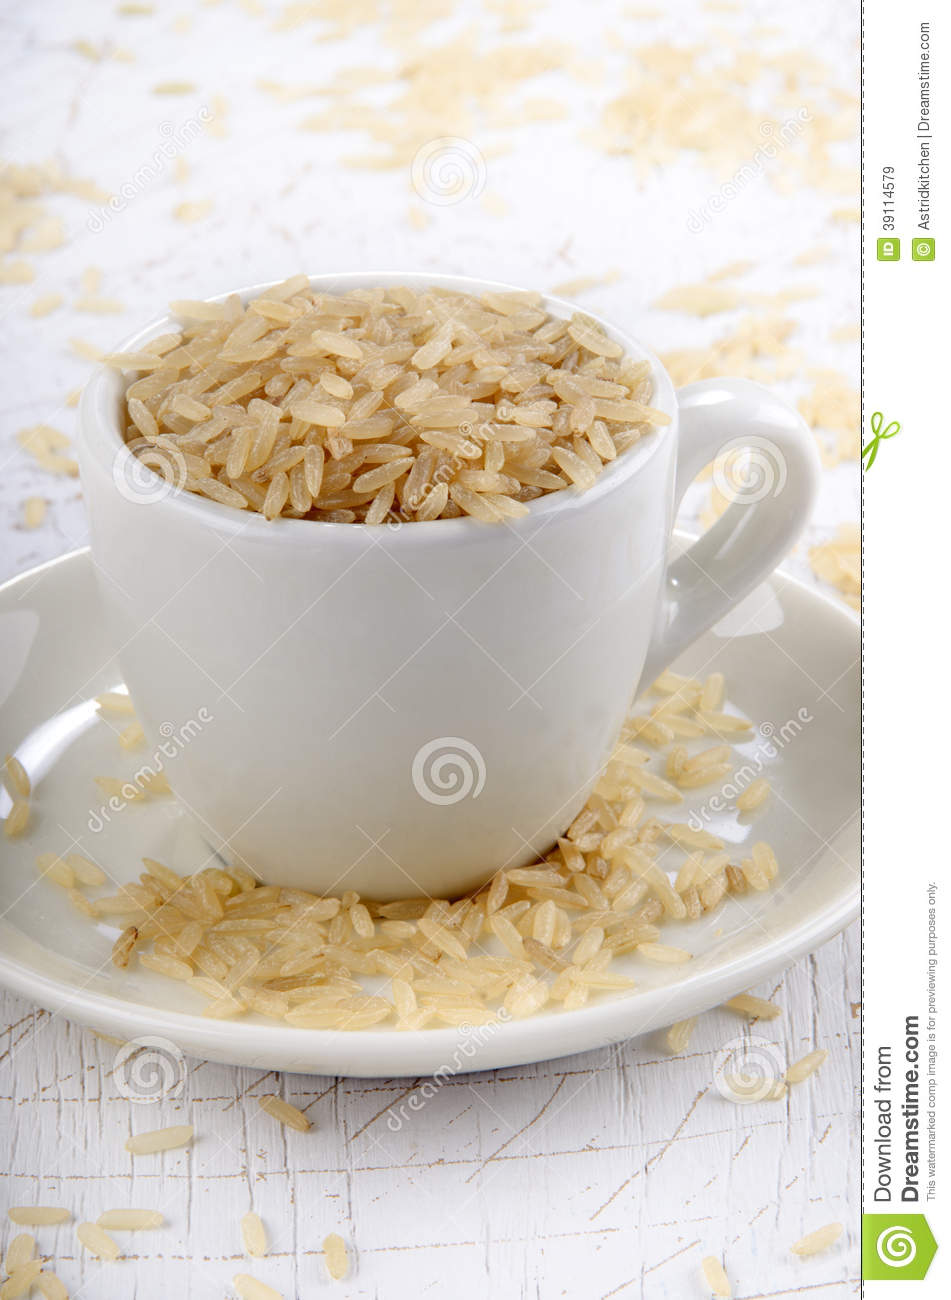 Brown Rice In A Cup Stock Photo   Image  39114579